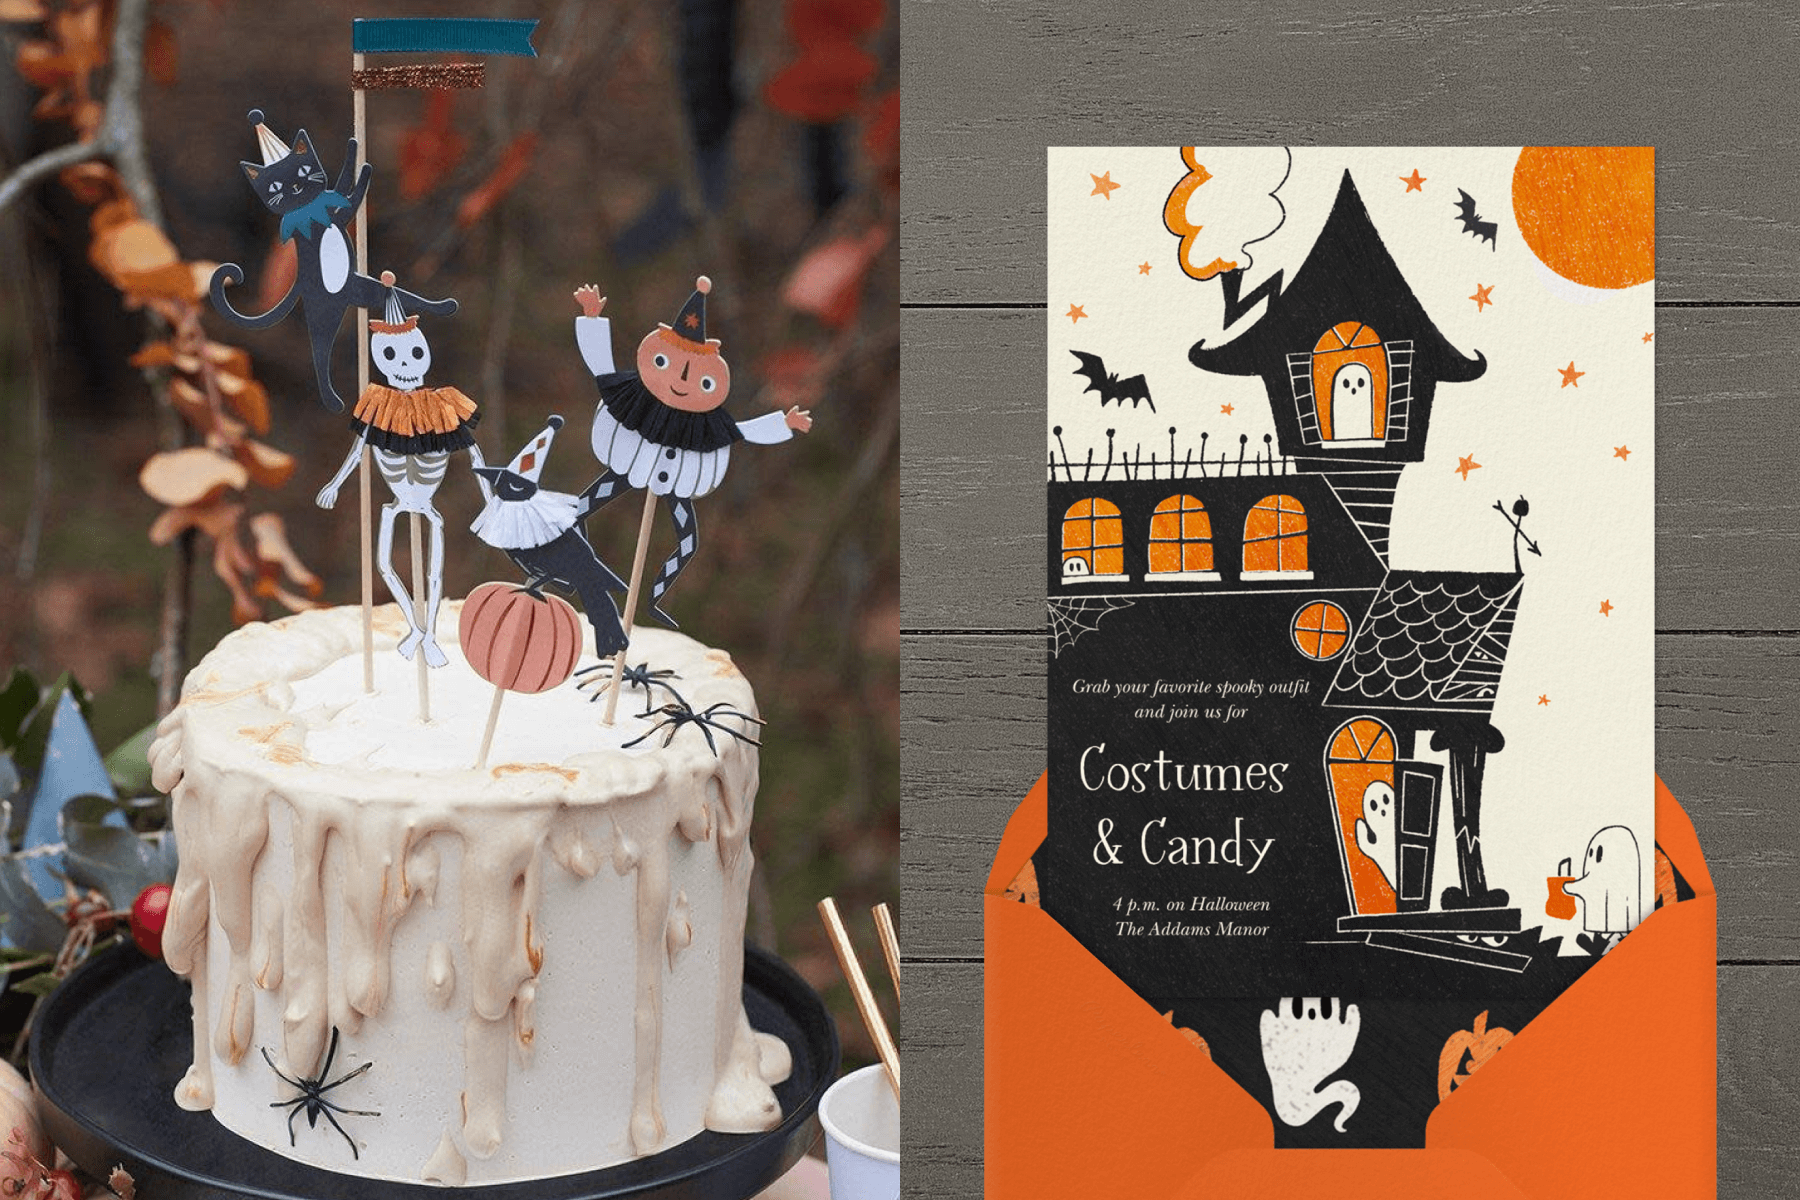 Left: A Halloween cake with cute cake toppers including a skeleton, pumpkin, and a cat; right: a cute Halloween invitation featuring ghosts trick or treating at a haunted house.